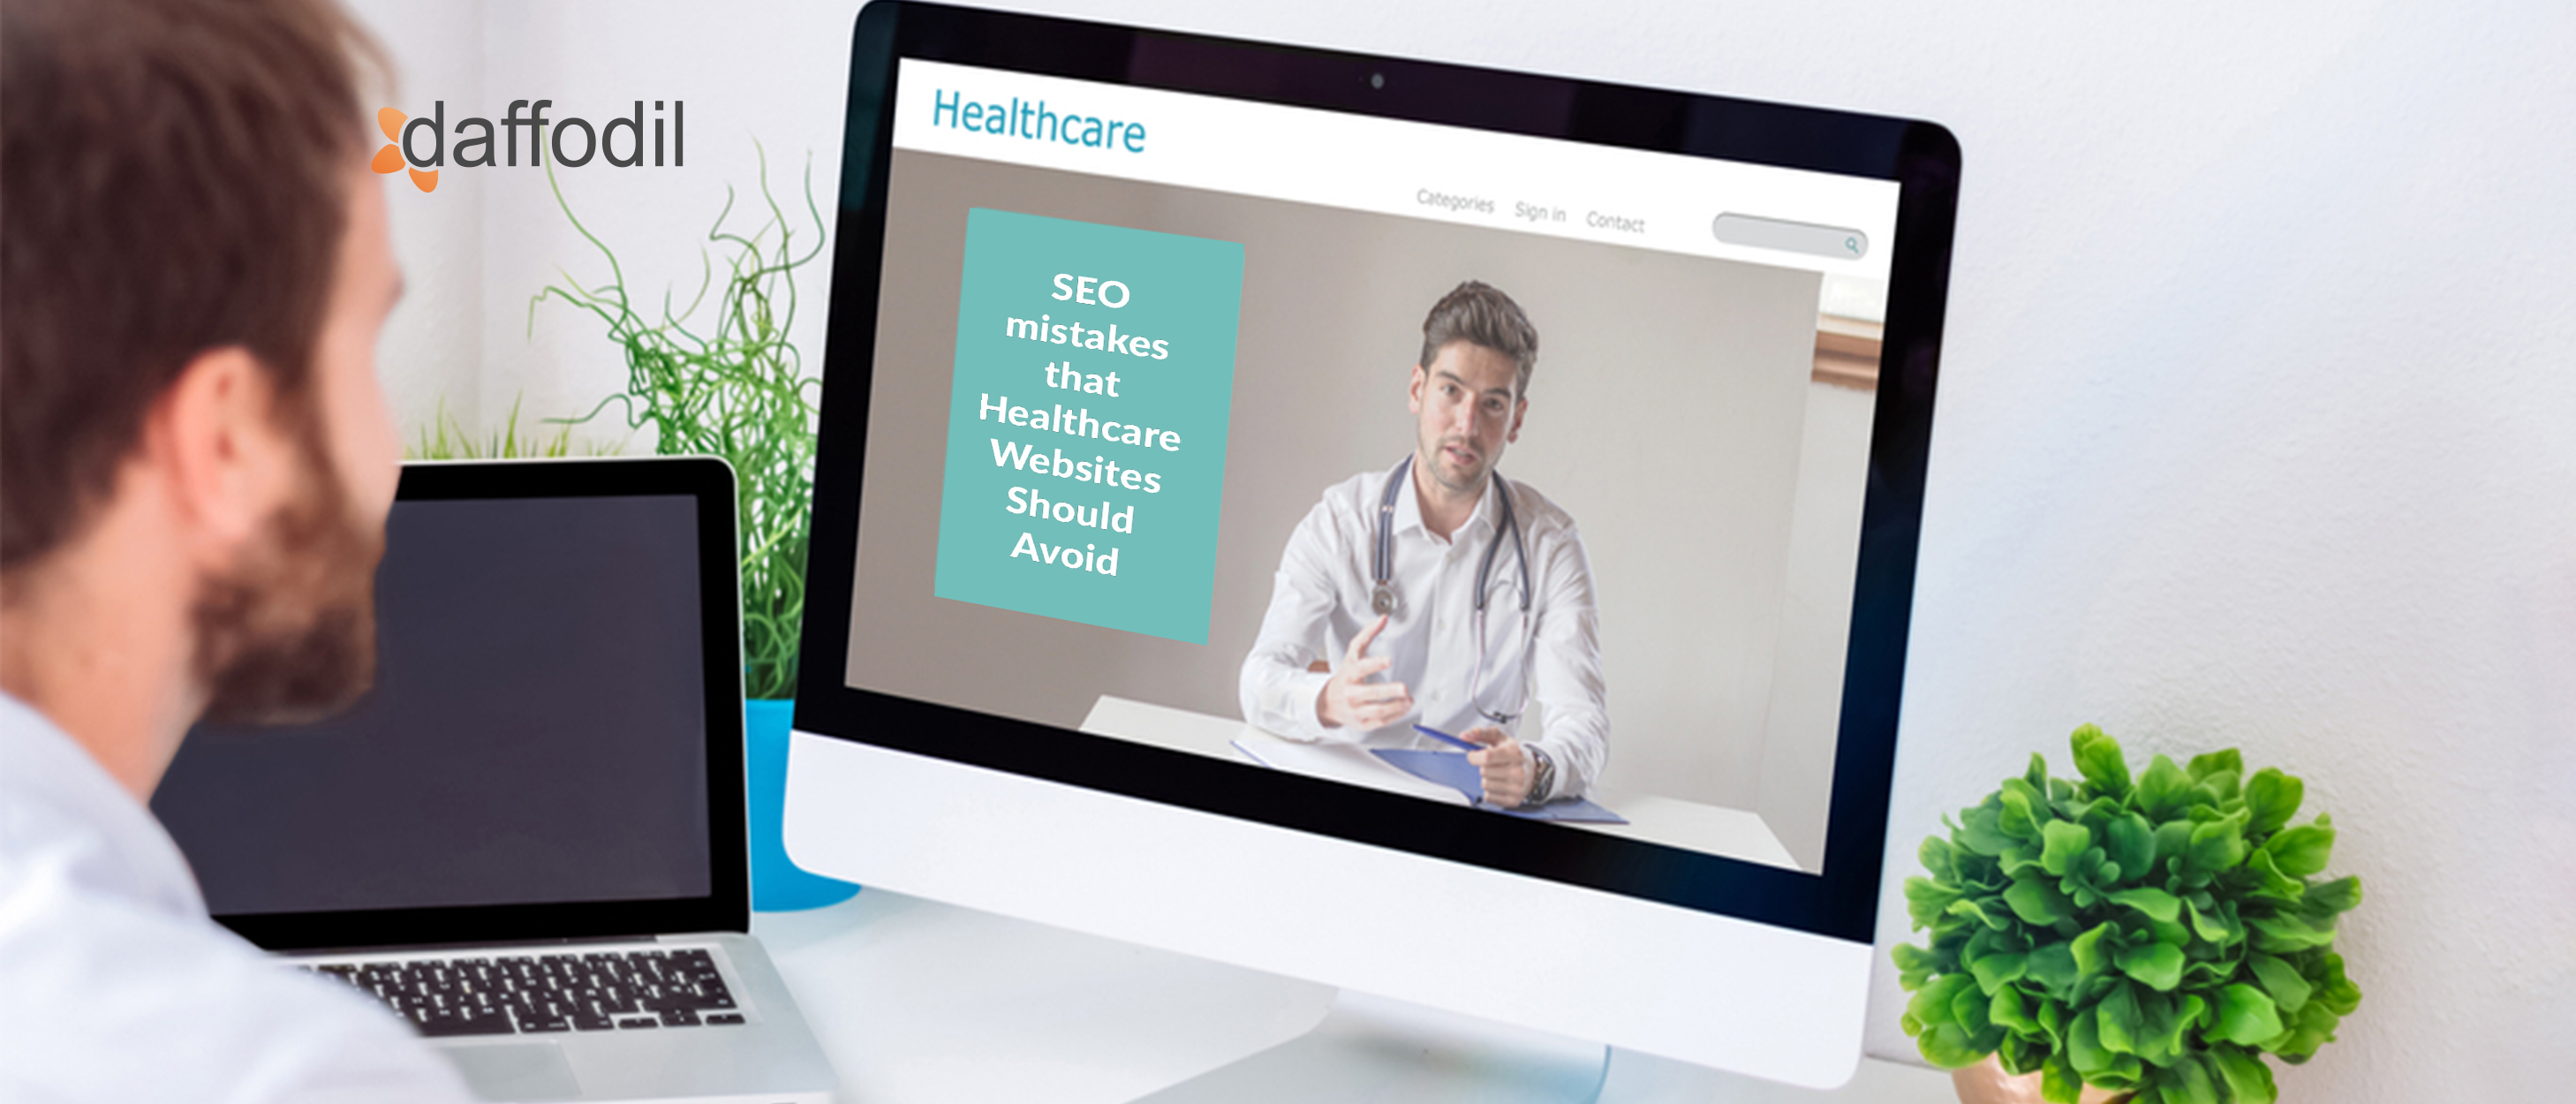 10 SEO mistakes that Healthcare Websites Should Avoid